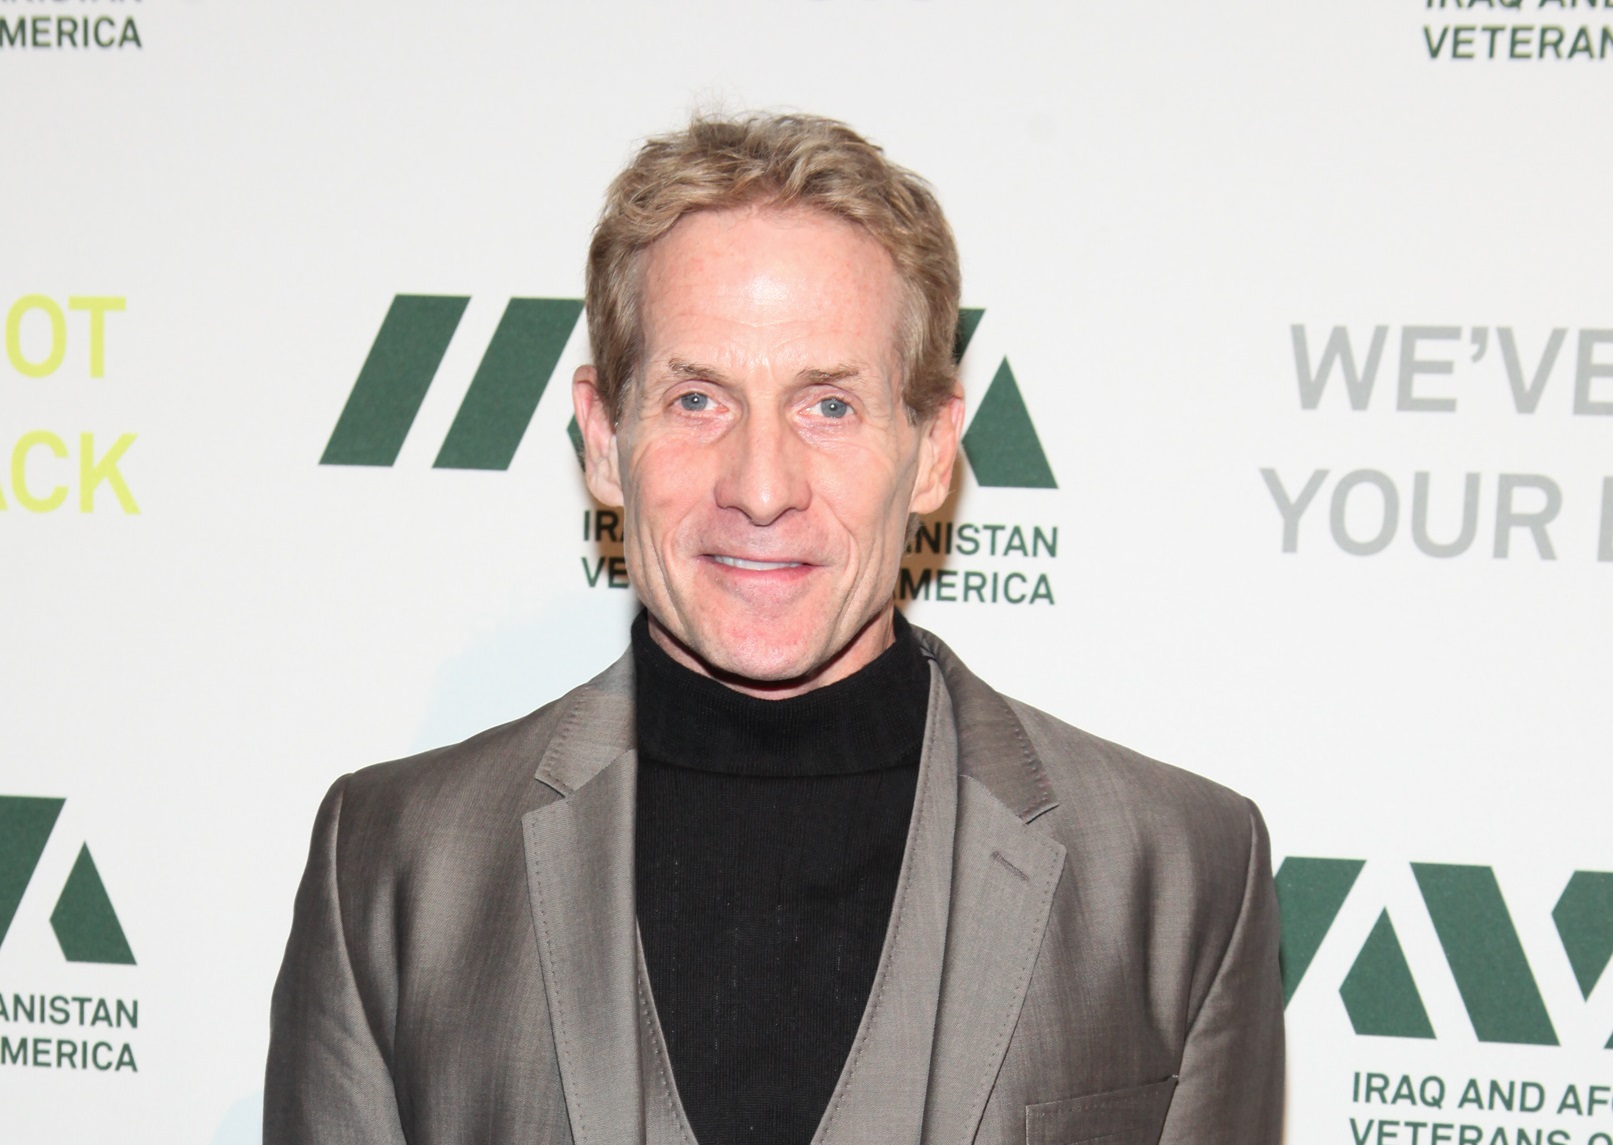 Skip Bayless Just Made the Worst Mistake of His Career